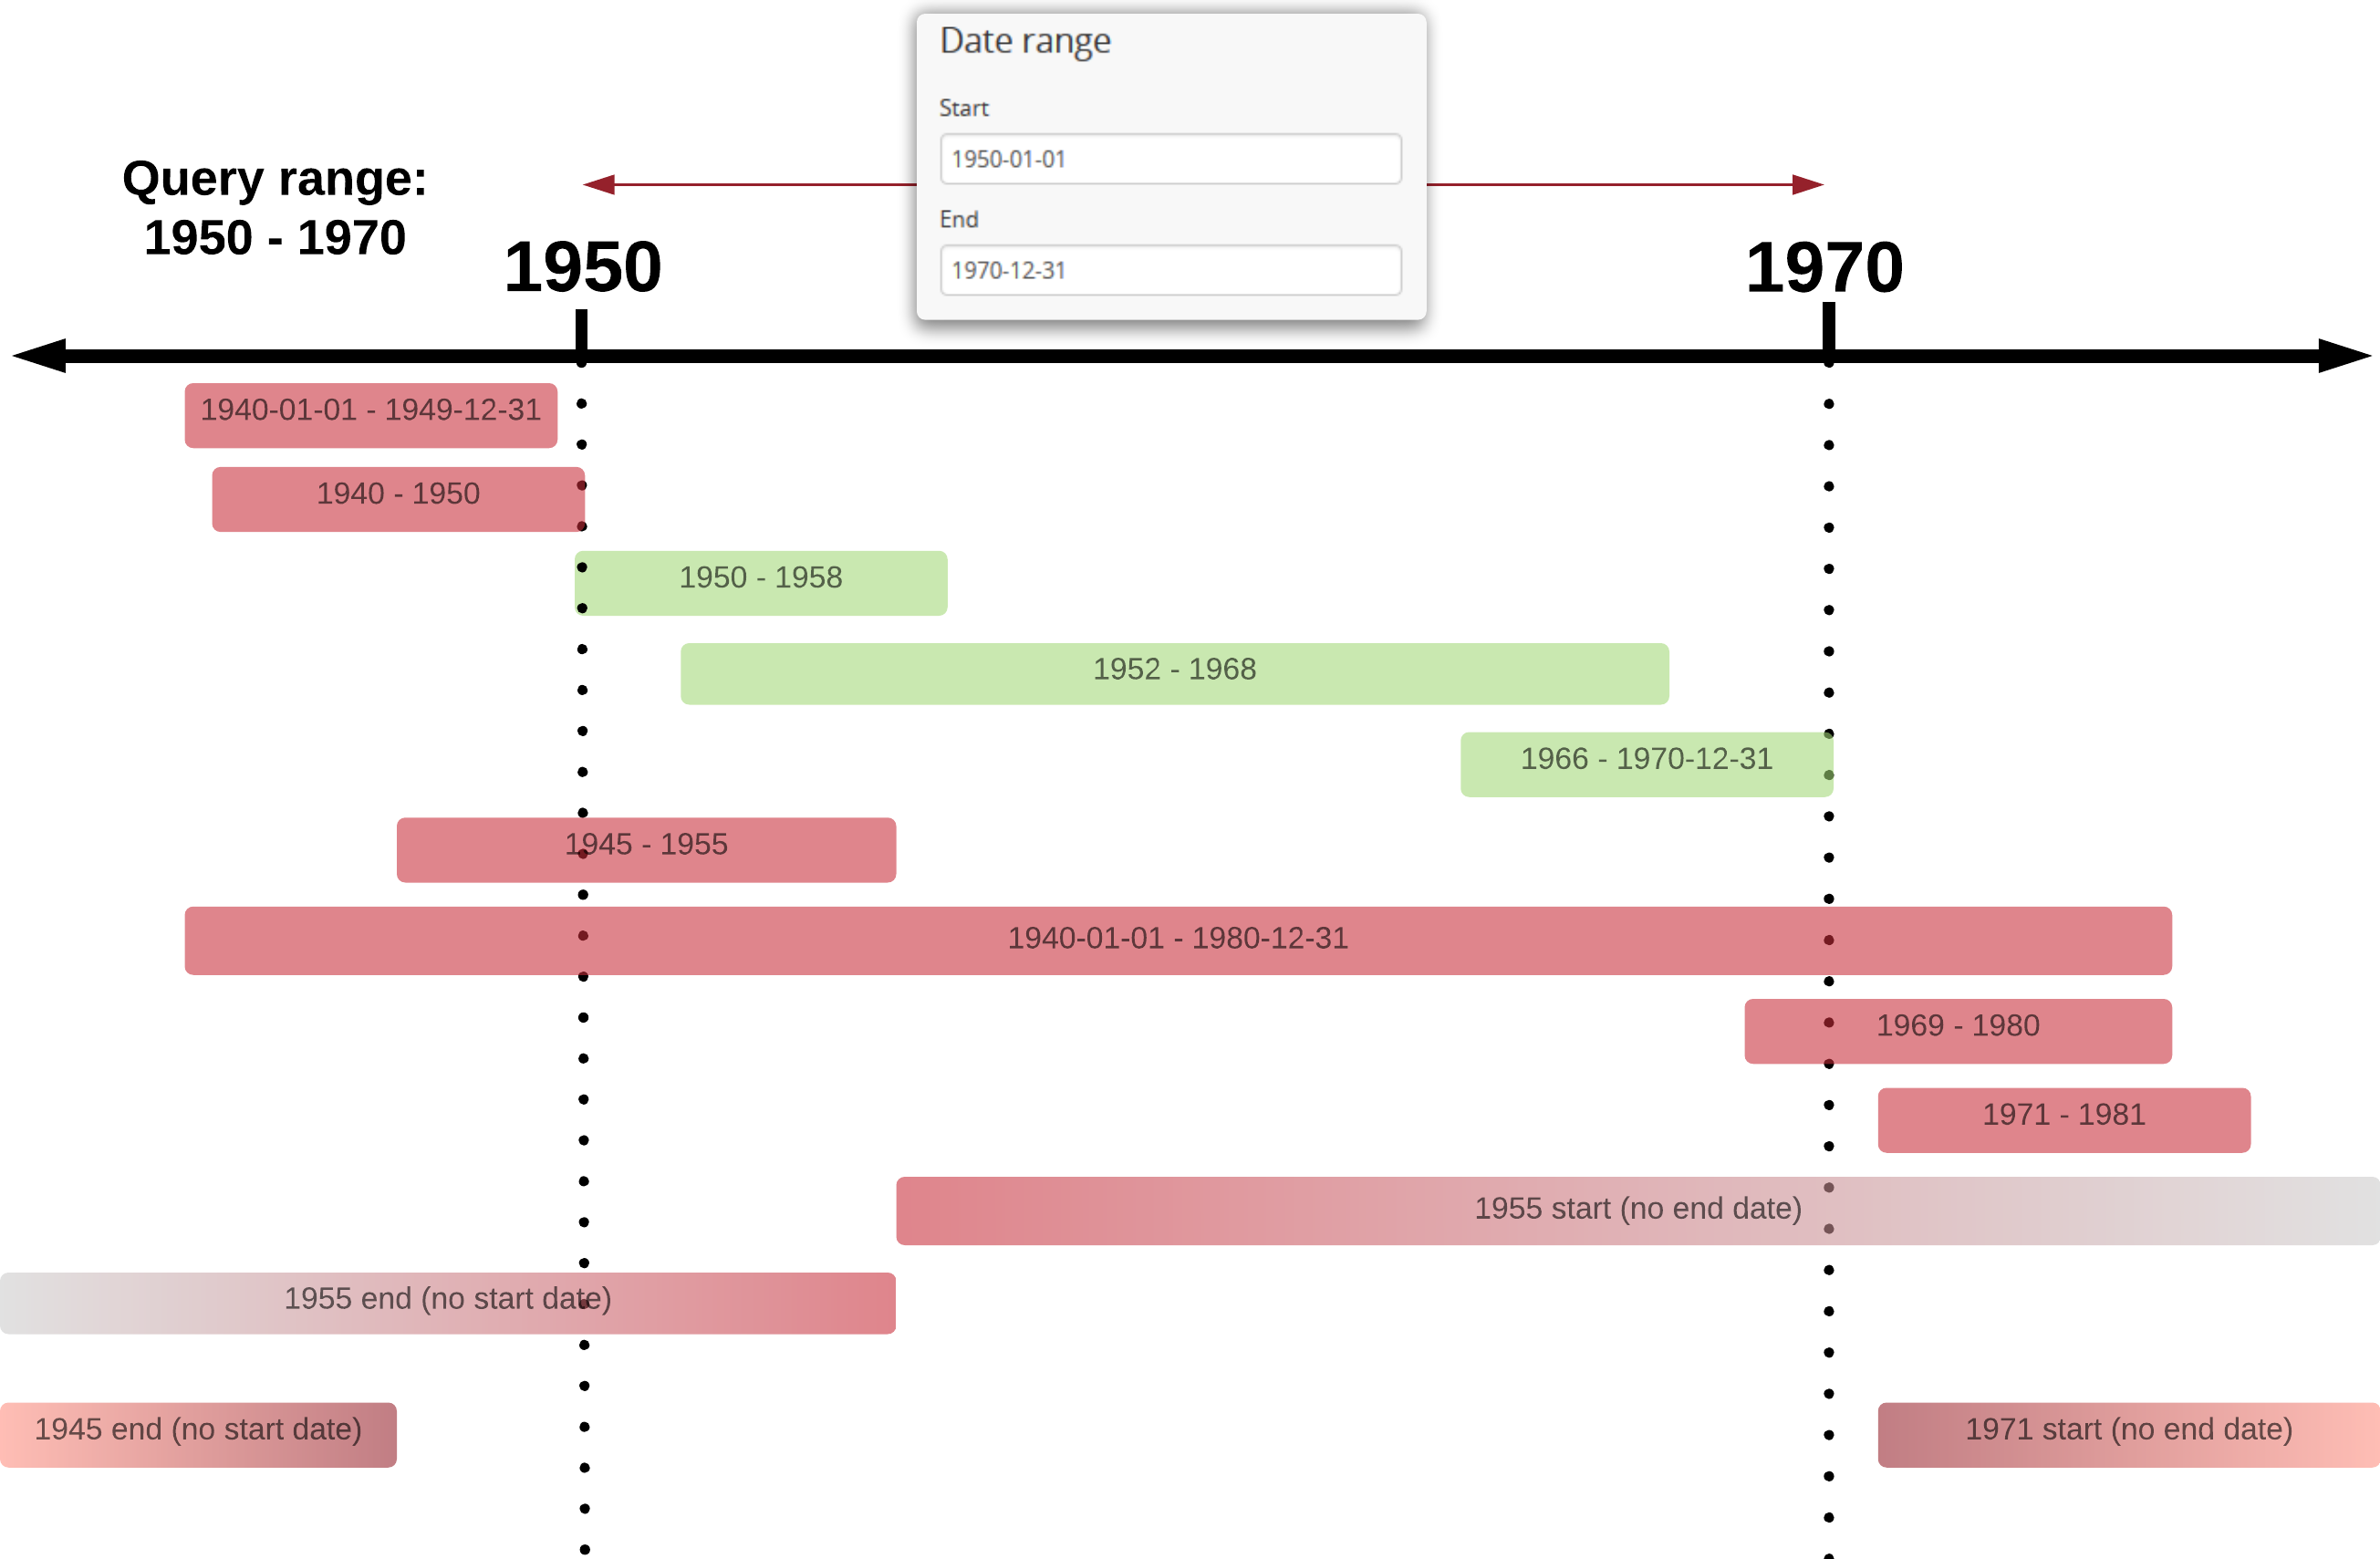 An example of results returned for a 1950-1970 query using the Exact option